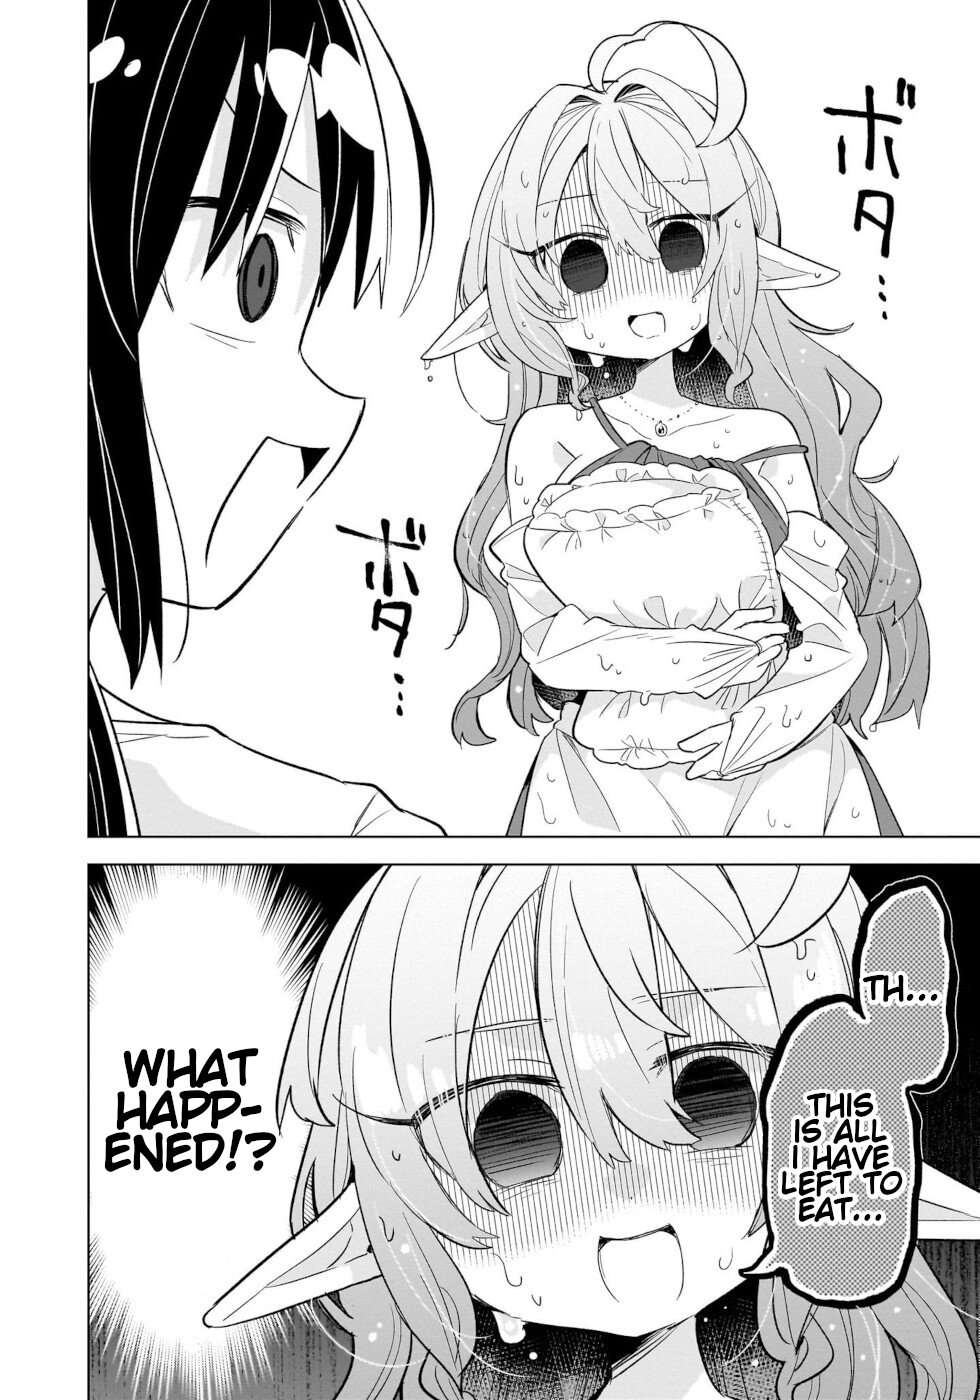 Sweets, Elf, And A High School Girl - chapter 10 - #2